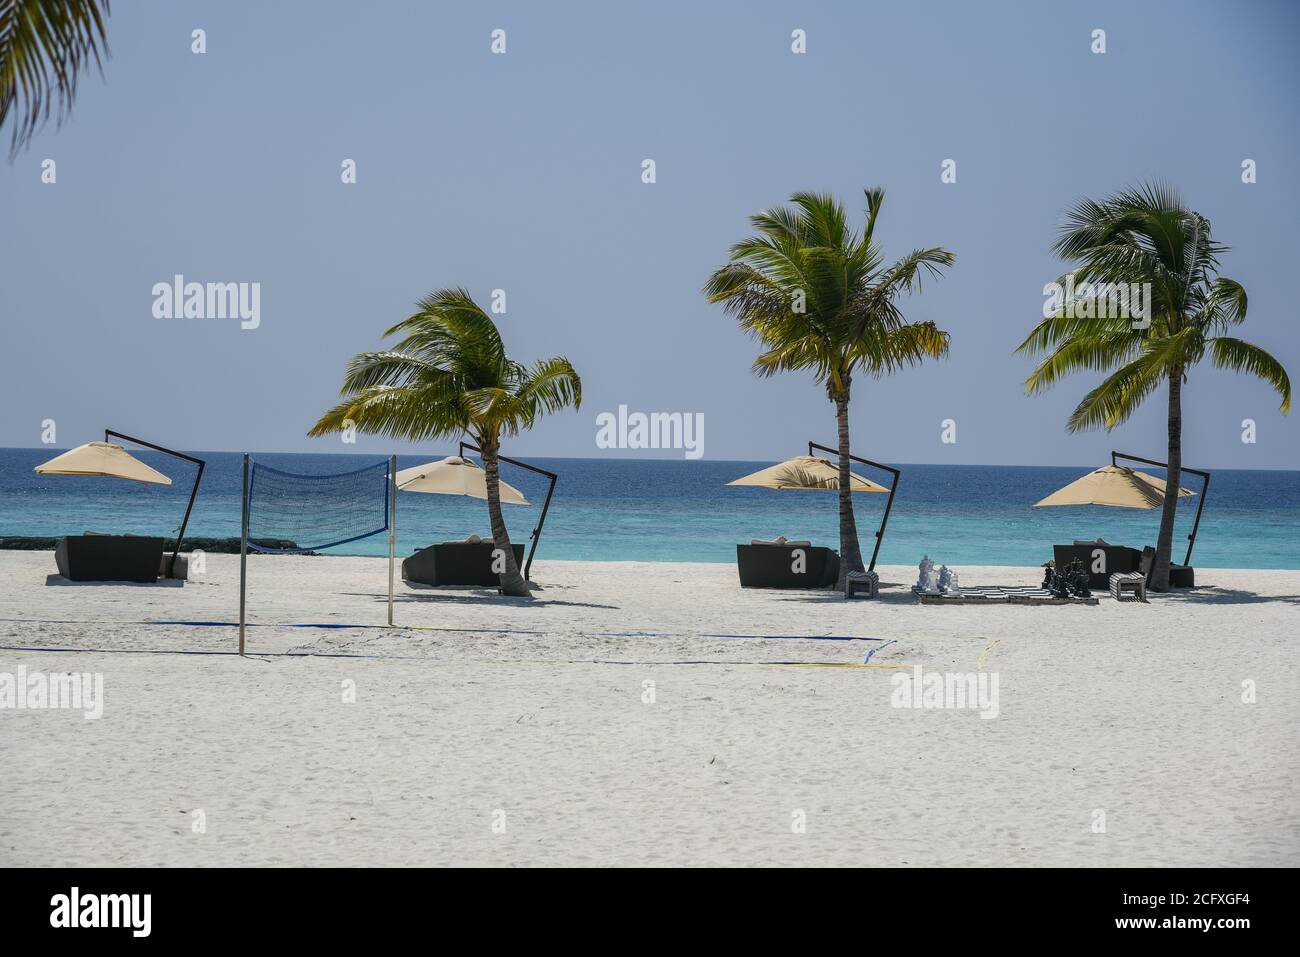 A row of shaded sun loungers and palm tress line the beach at a luxury resort in the Maldives. Stock Photo